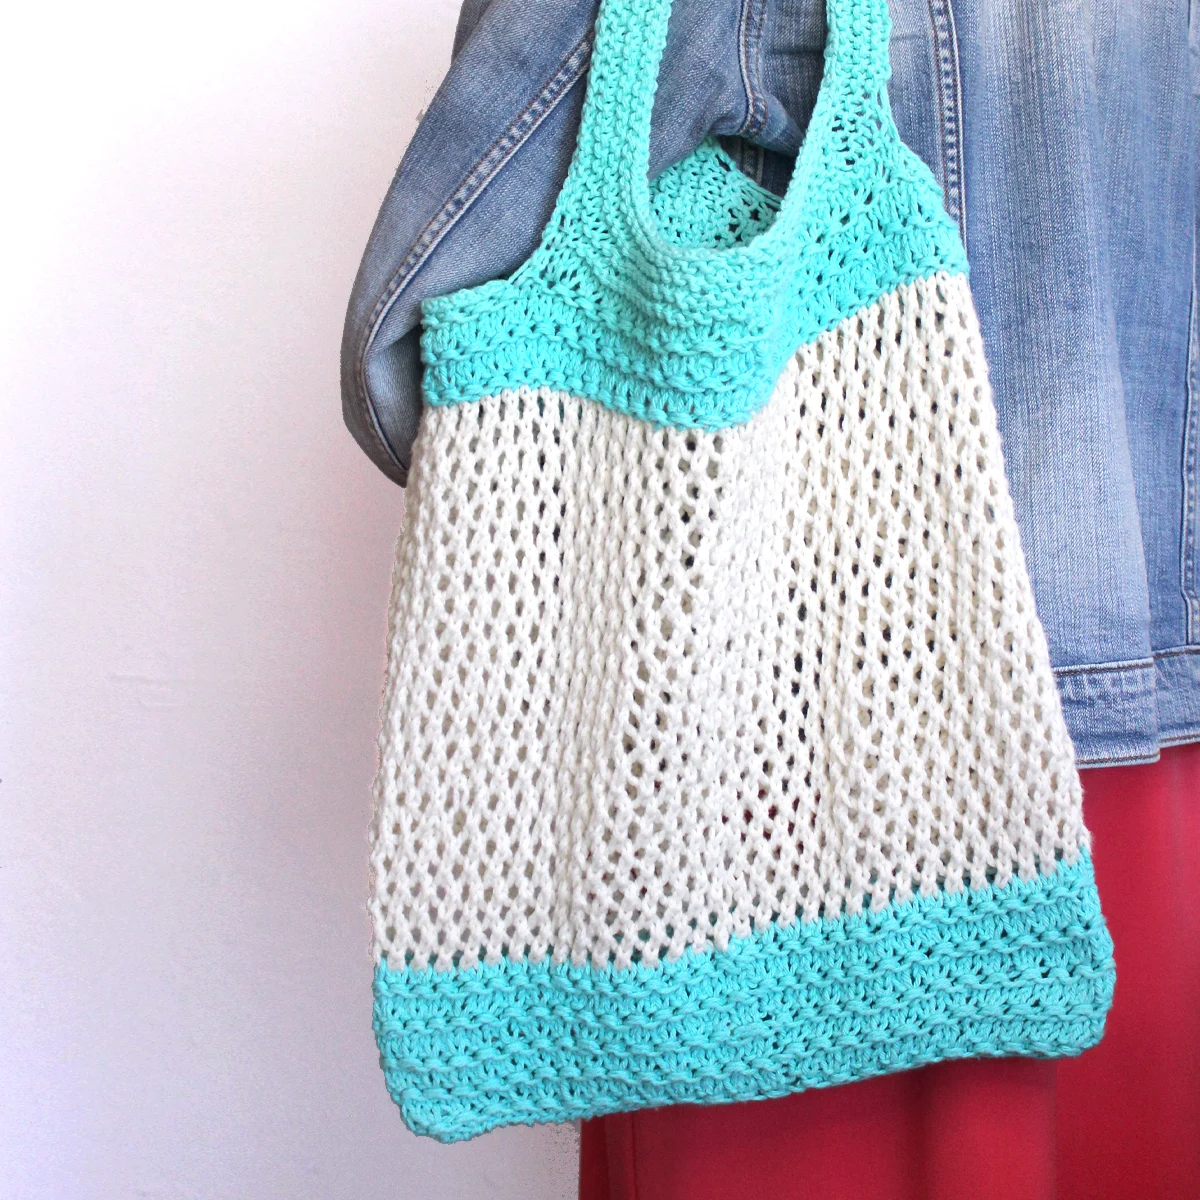 Cotton market bag knitted in blue and white yarn colors.